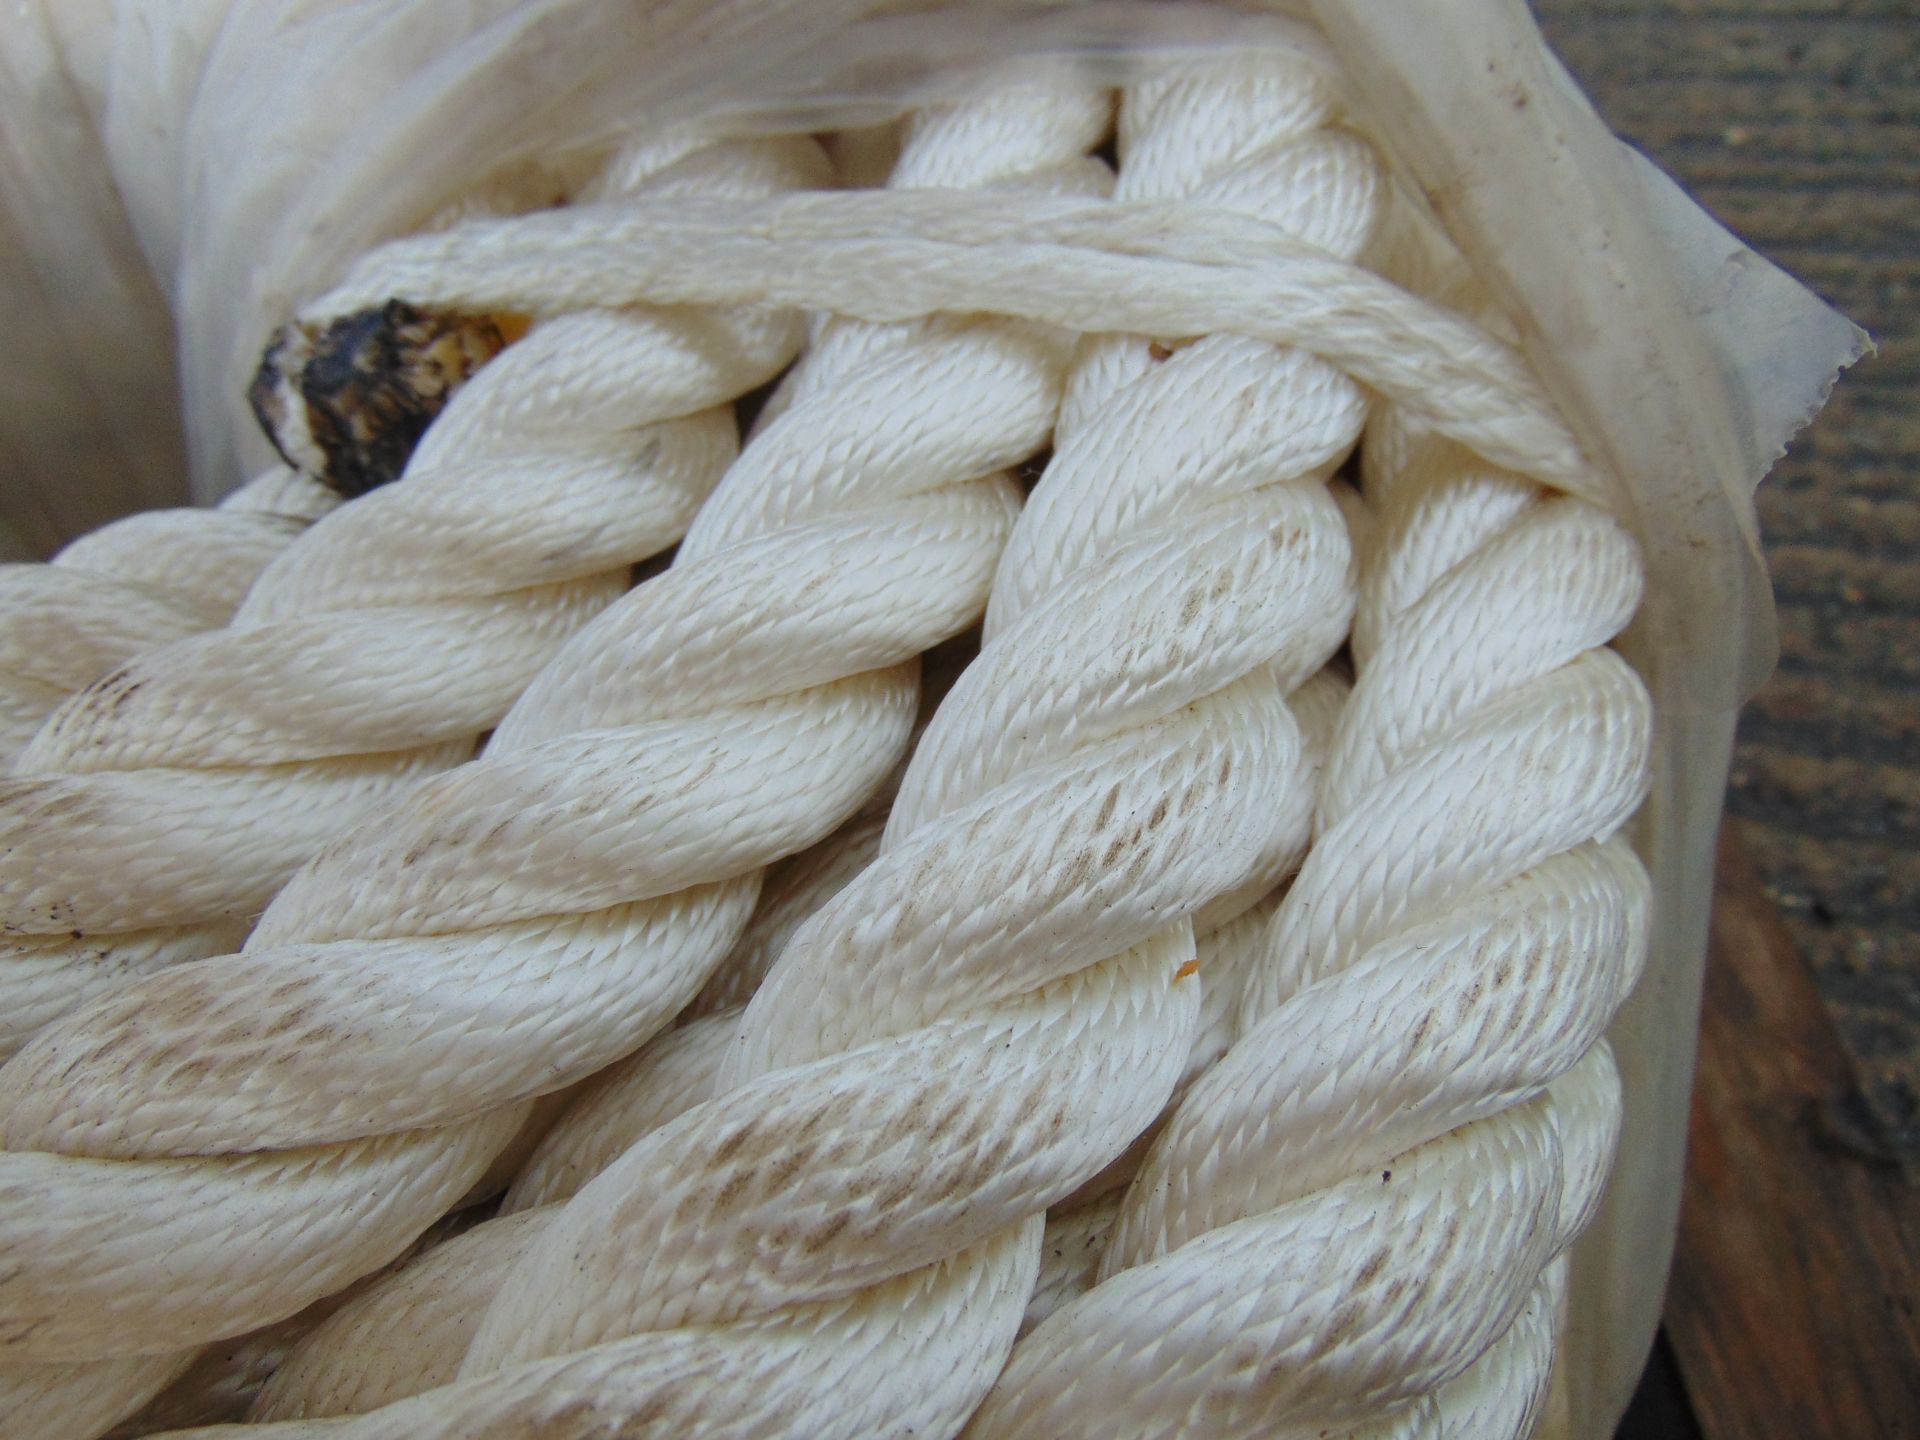 Unissued 75m x 32mm Parabuckling Rope - Image 2 of 3